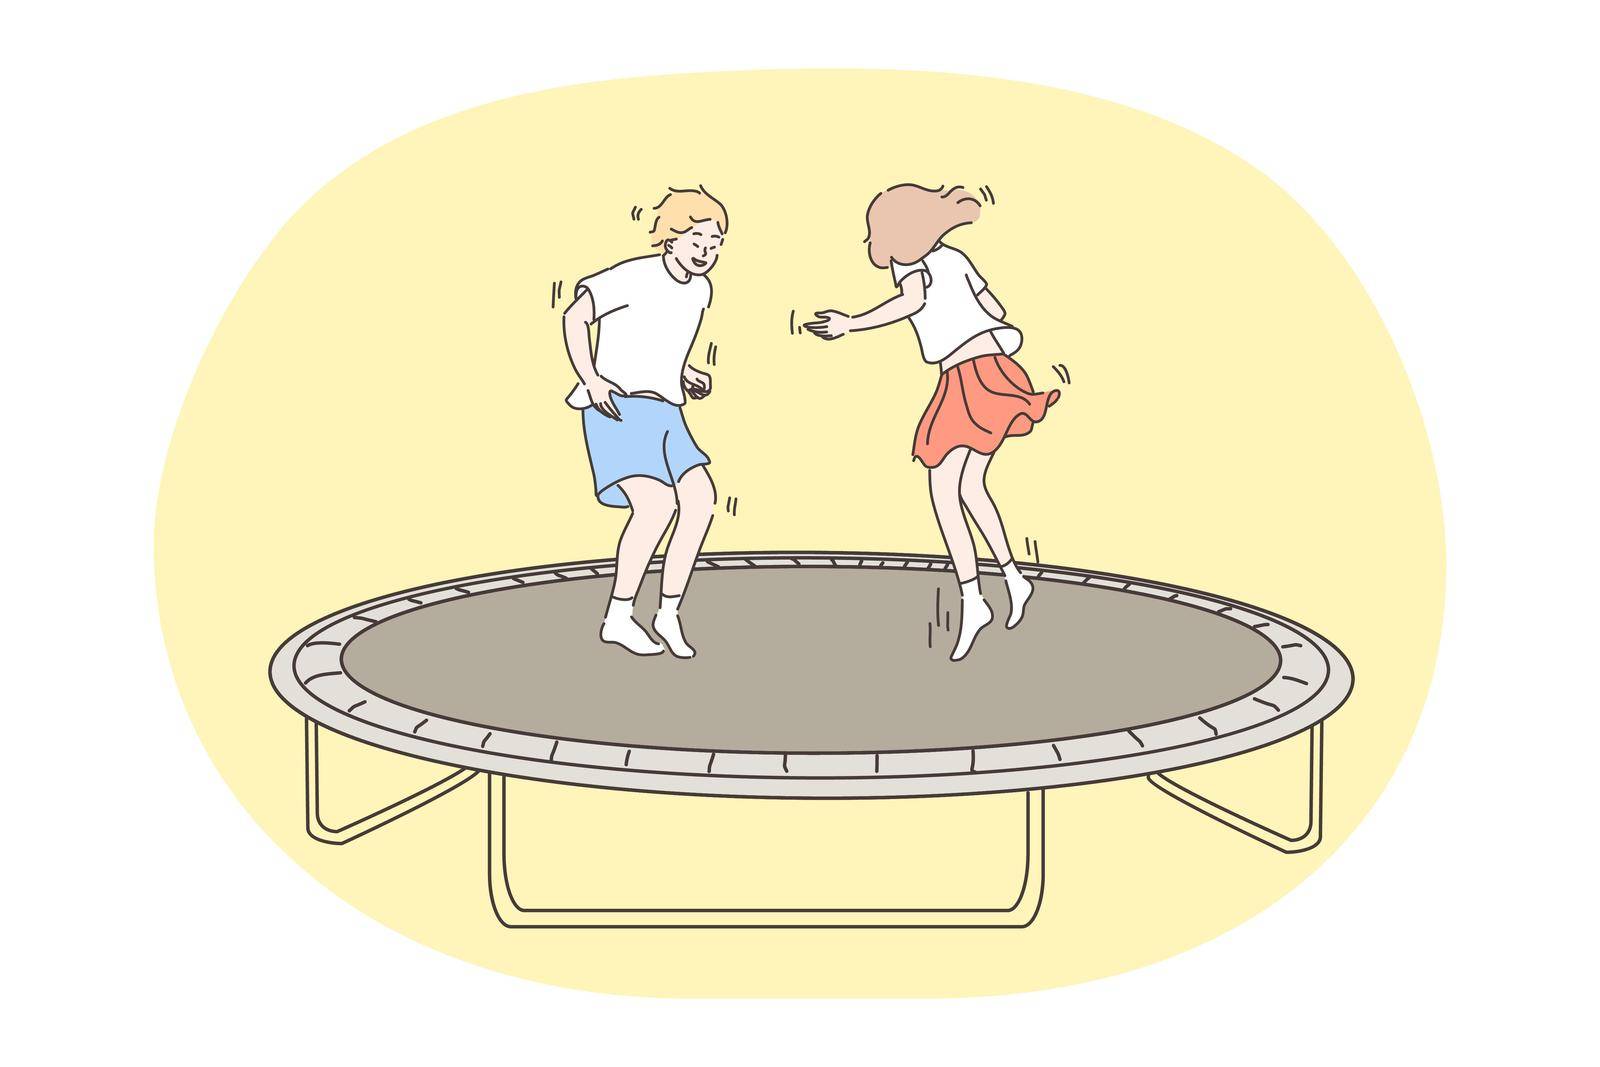 Jumping children, holiday, childhood concept by VECTORIUM